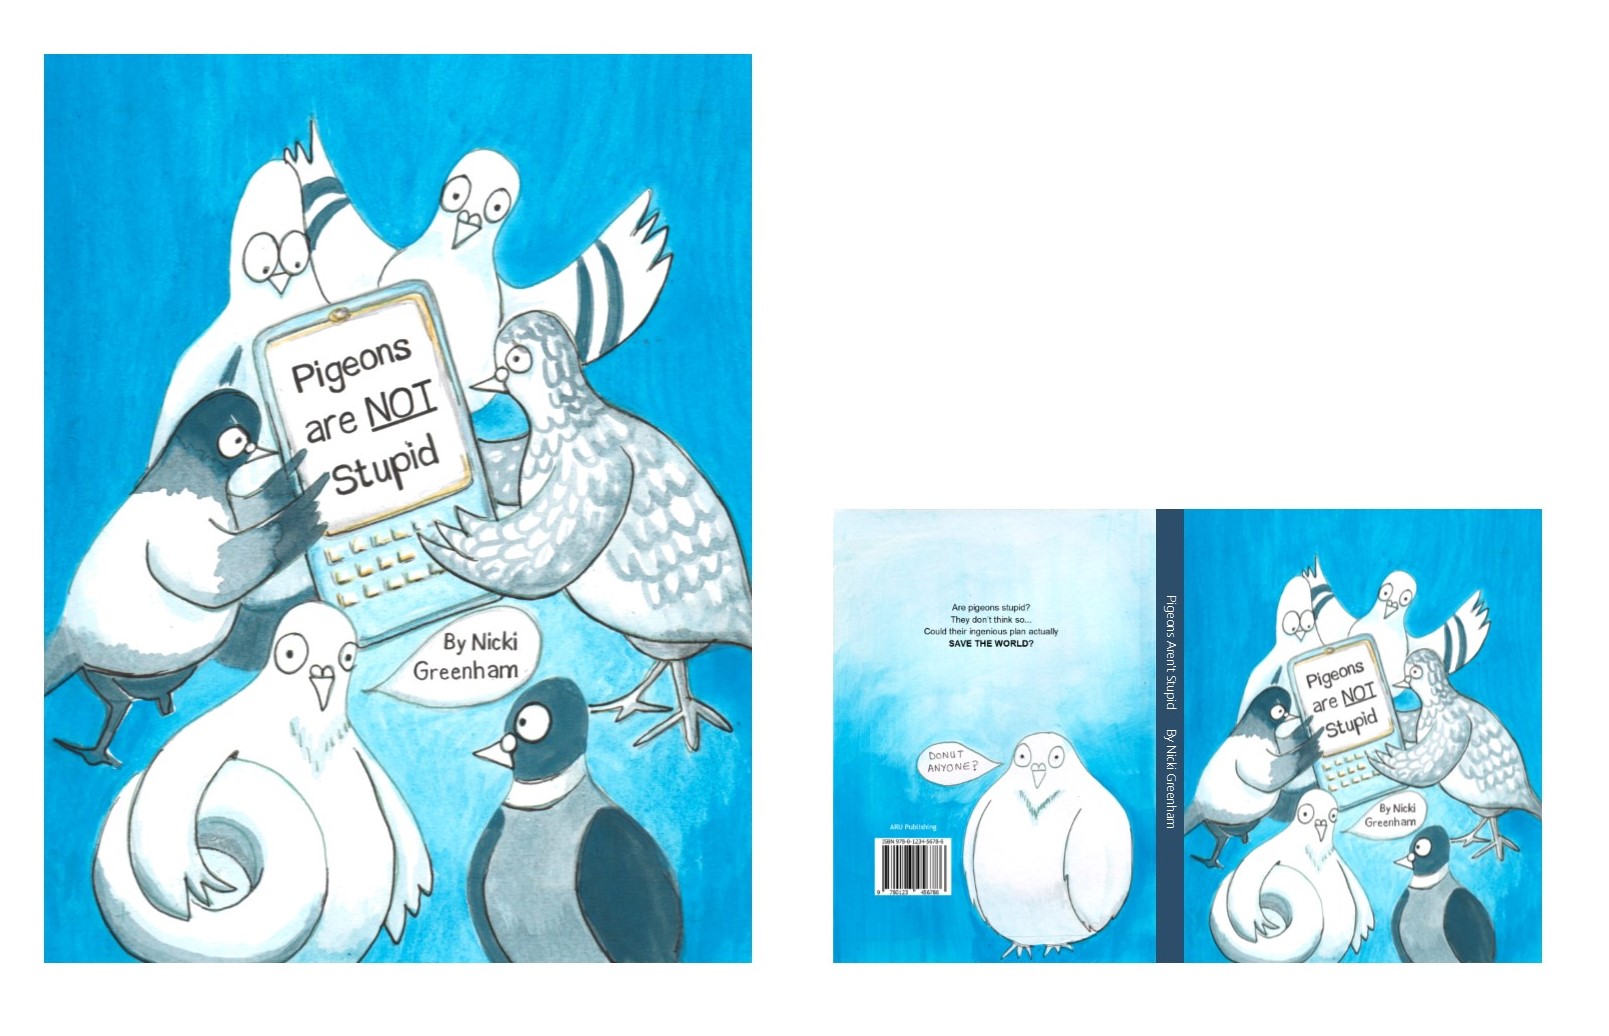 "Pigeons" Front Cover - This is the front cover from the graphic novel I produced for my MA.